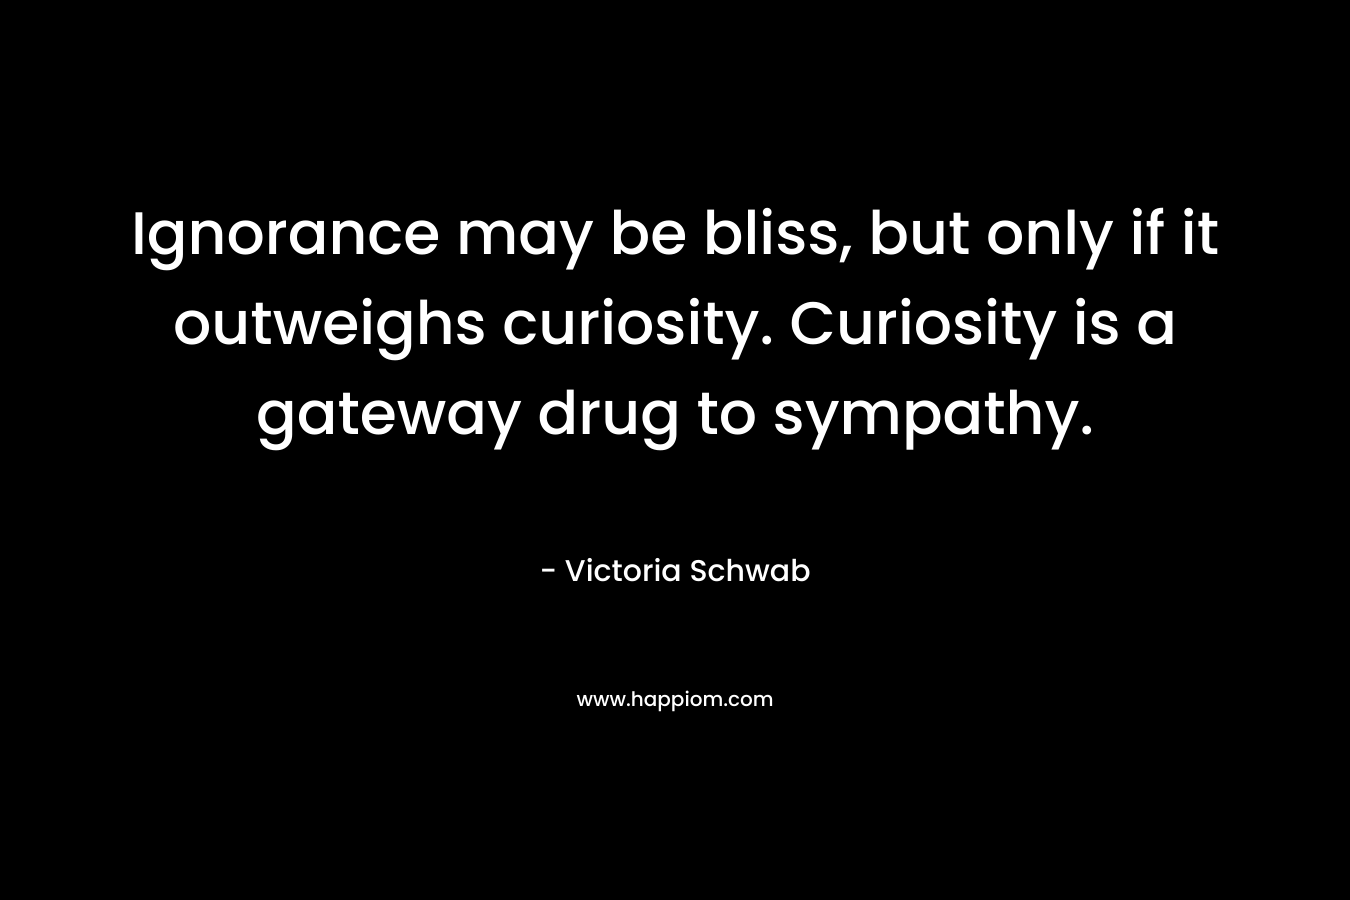 Ignorance may be bliss, but only if it outweighs curiosity. Curiosity is a gateway drug to sympathy. – Victoria Schwab